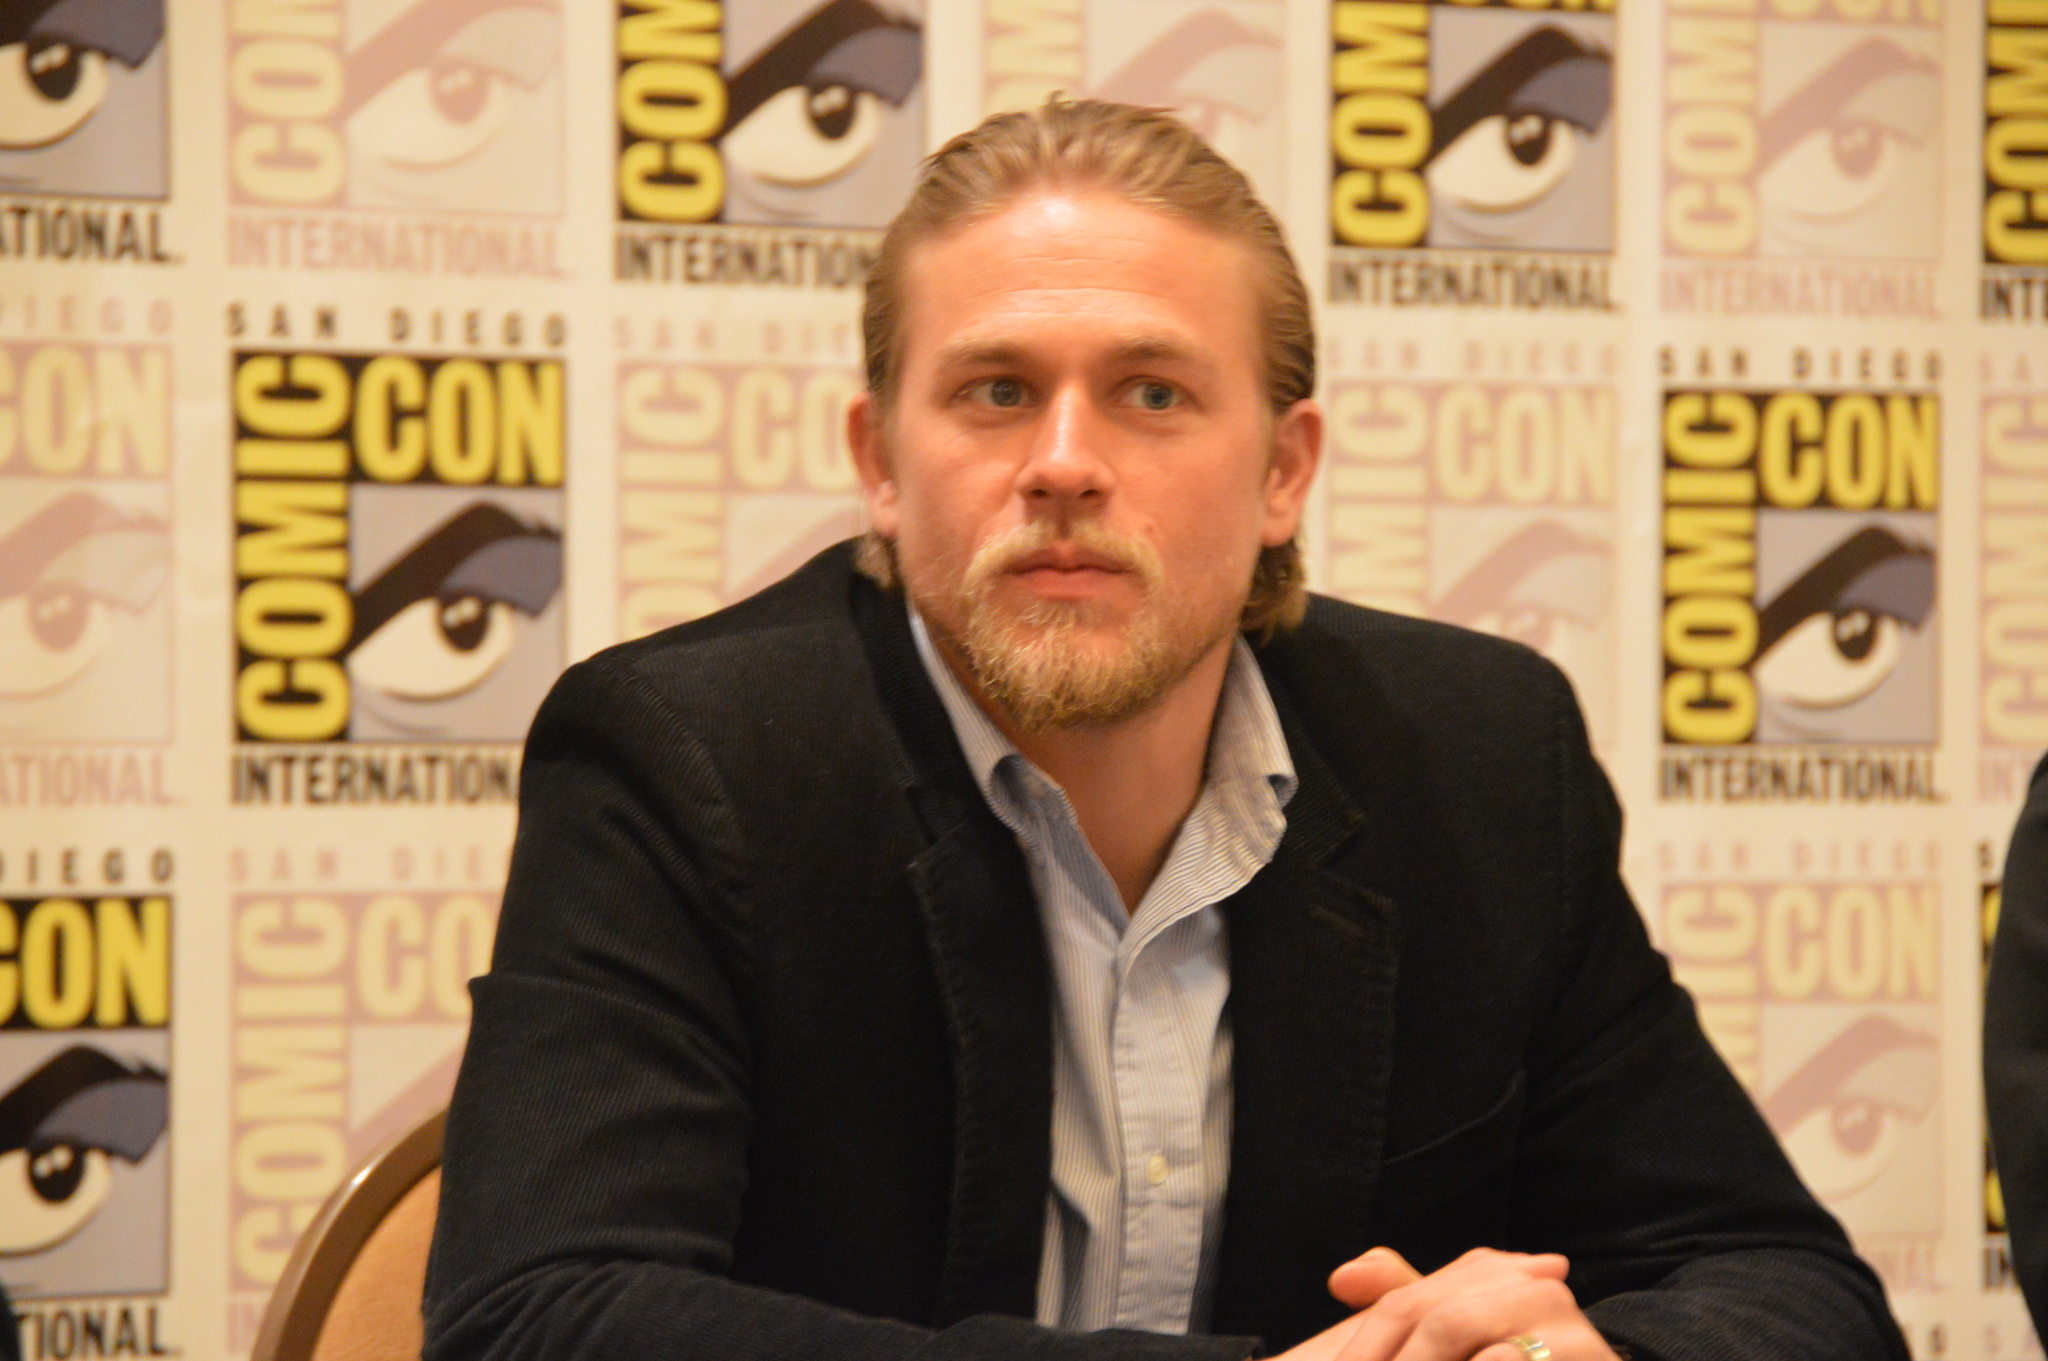 Charlie Hunnam at event of Ugnies ziedas (2013)